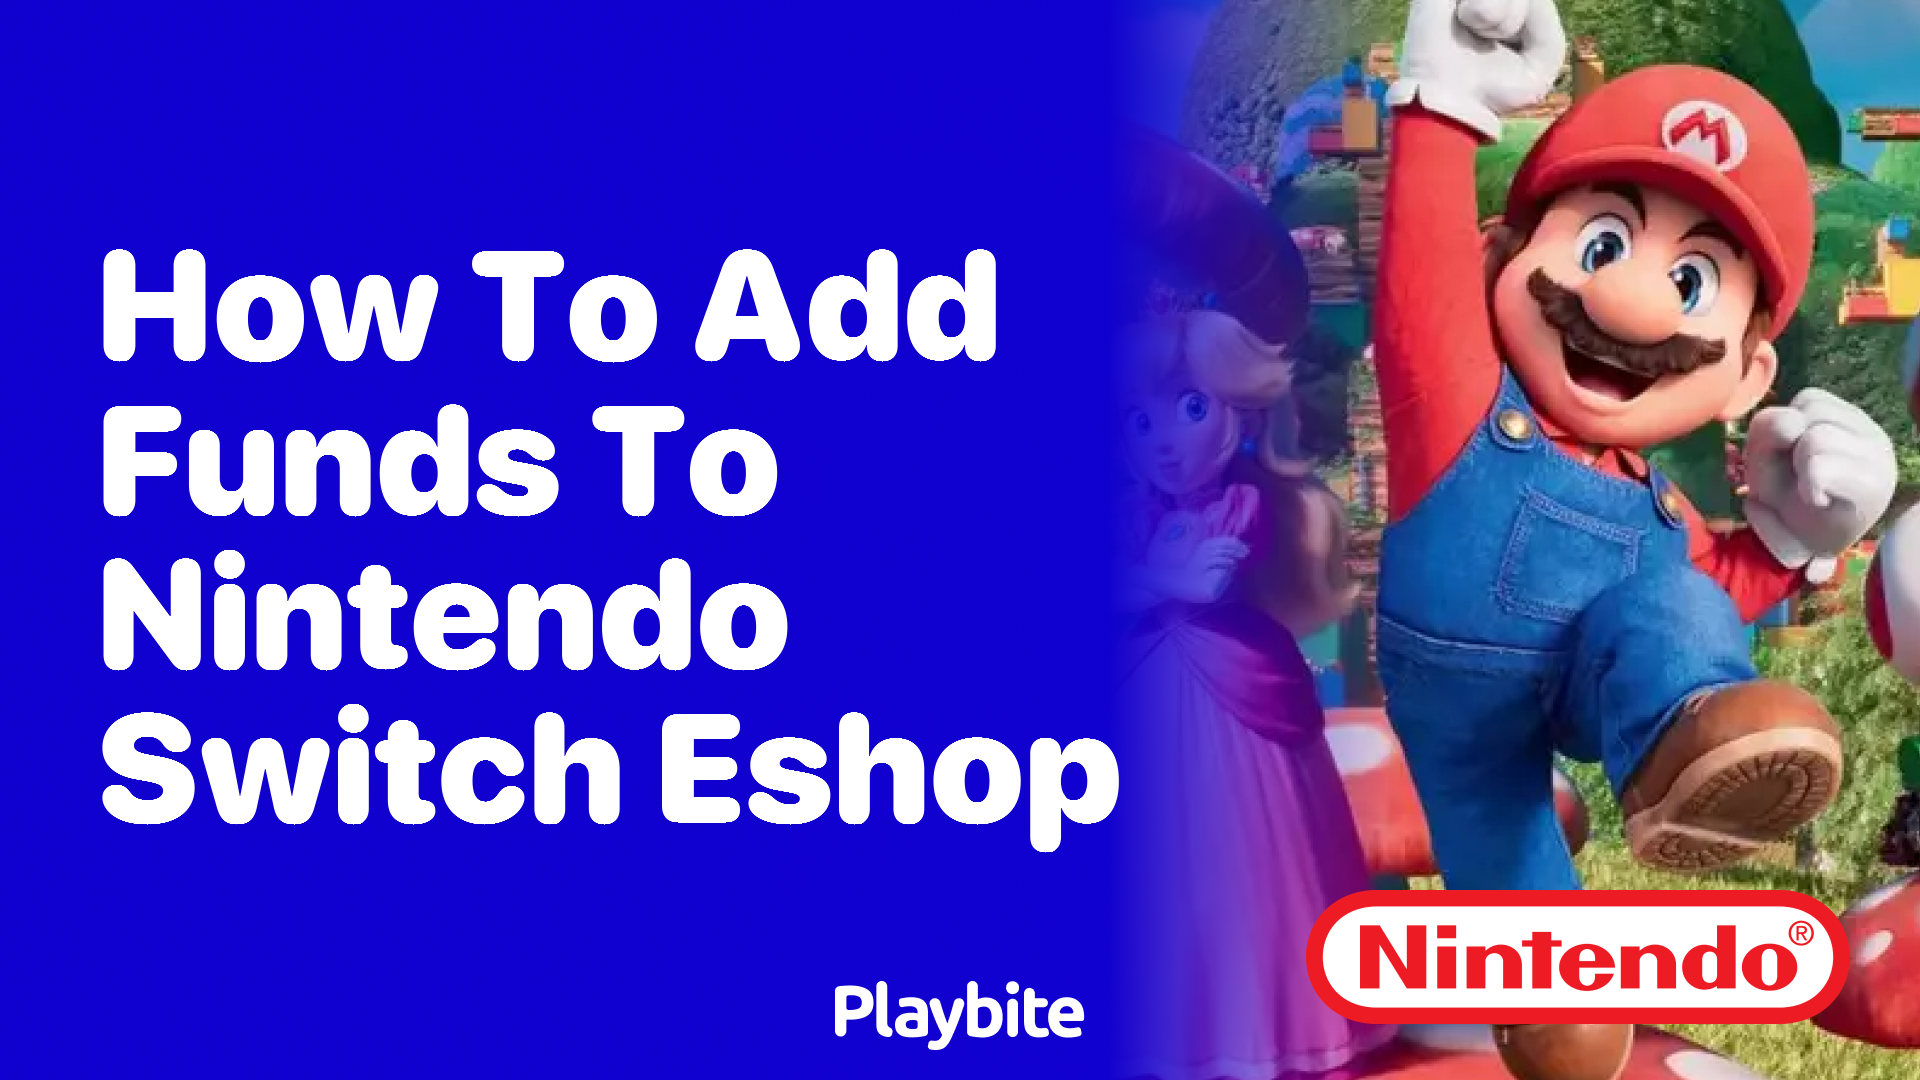 How to Add Funds to Your Nintendo Switch eShop